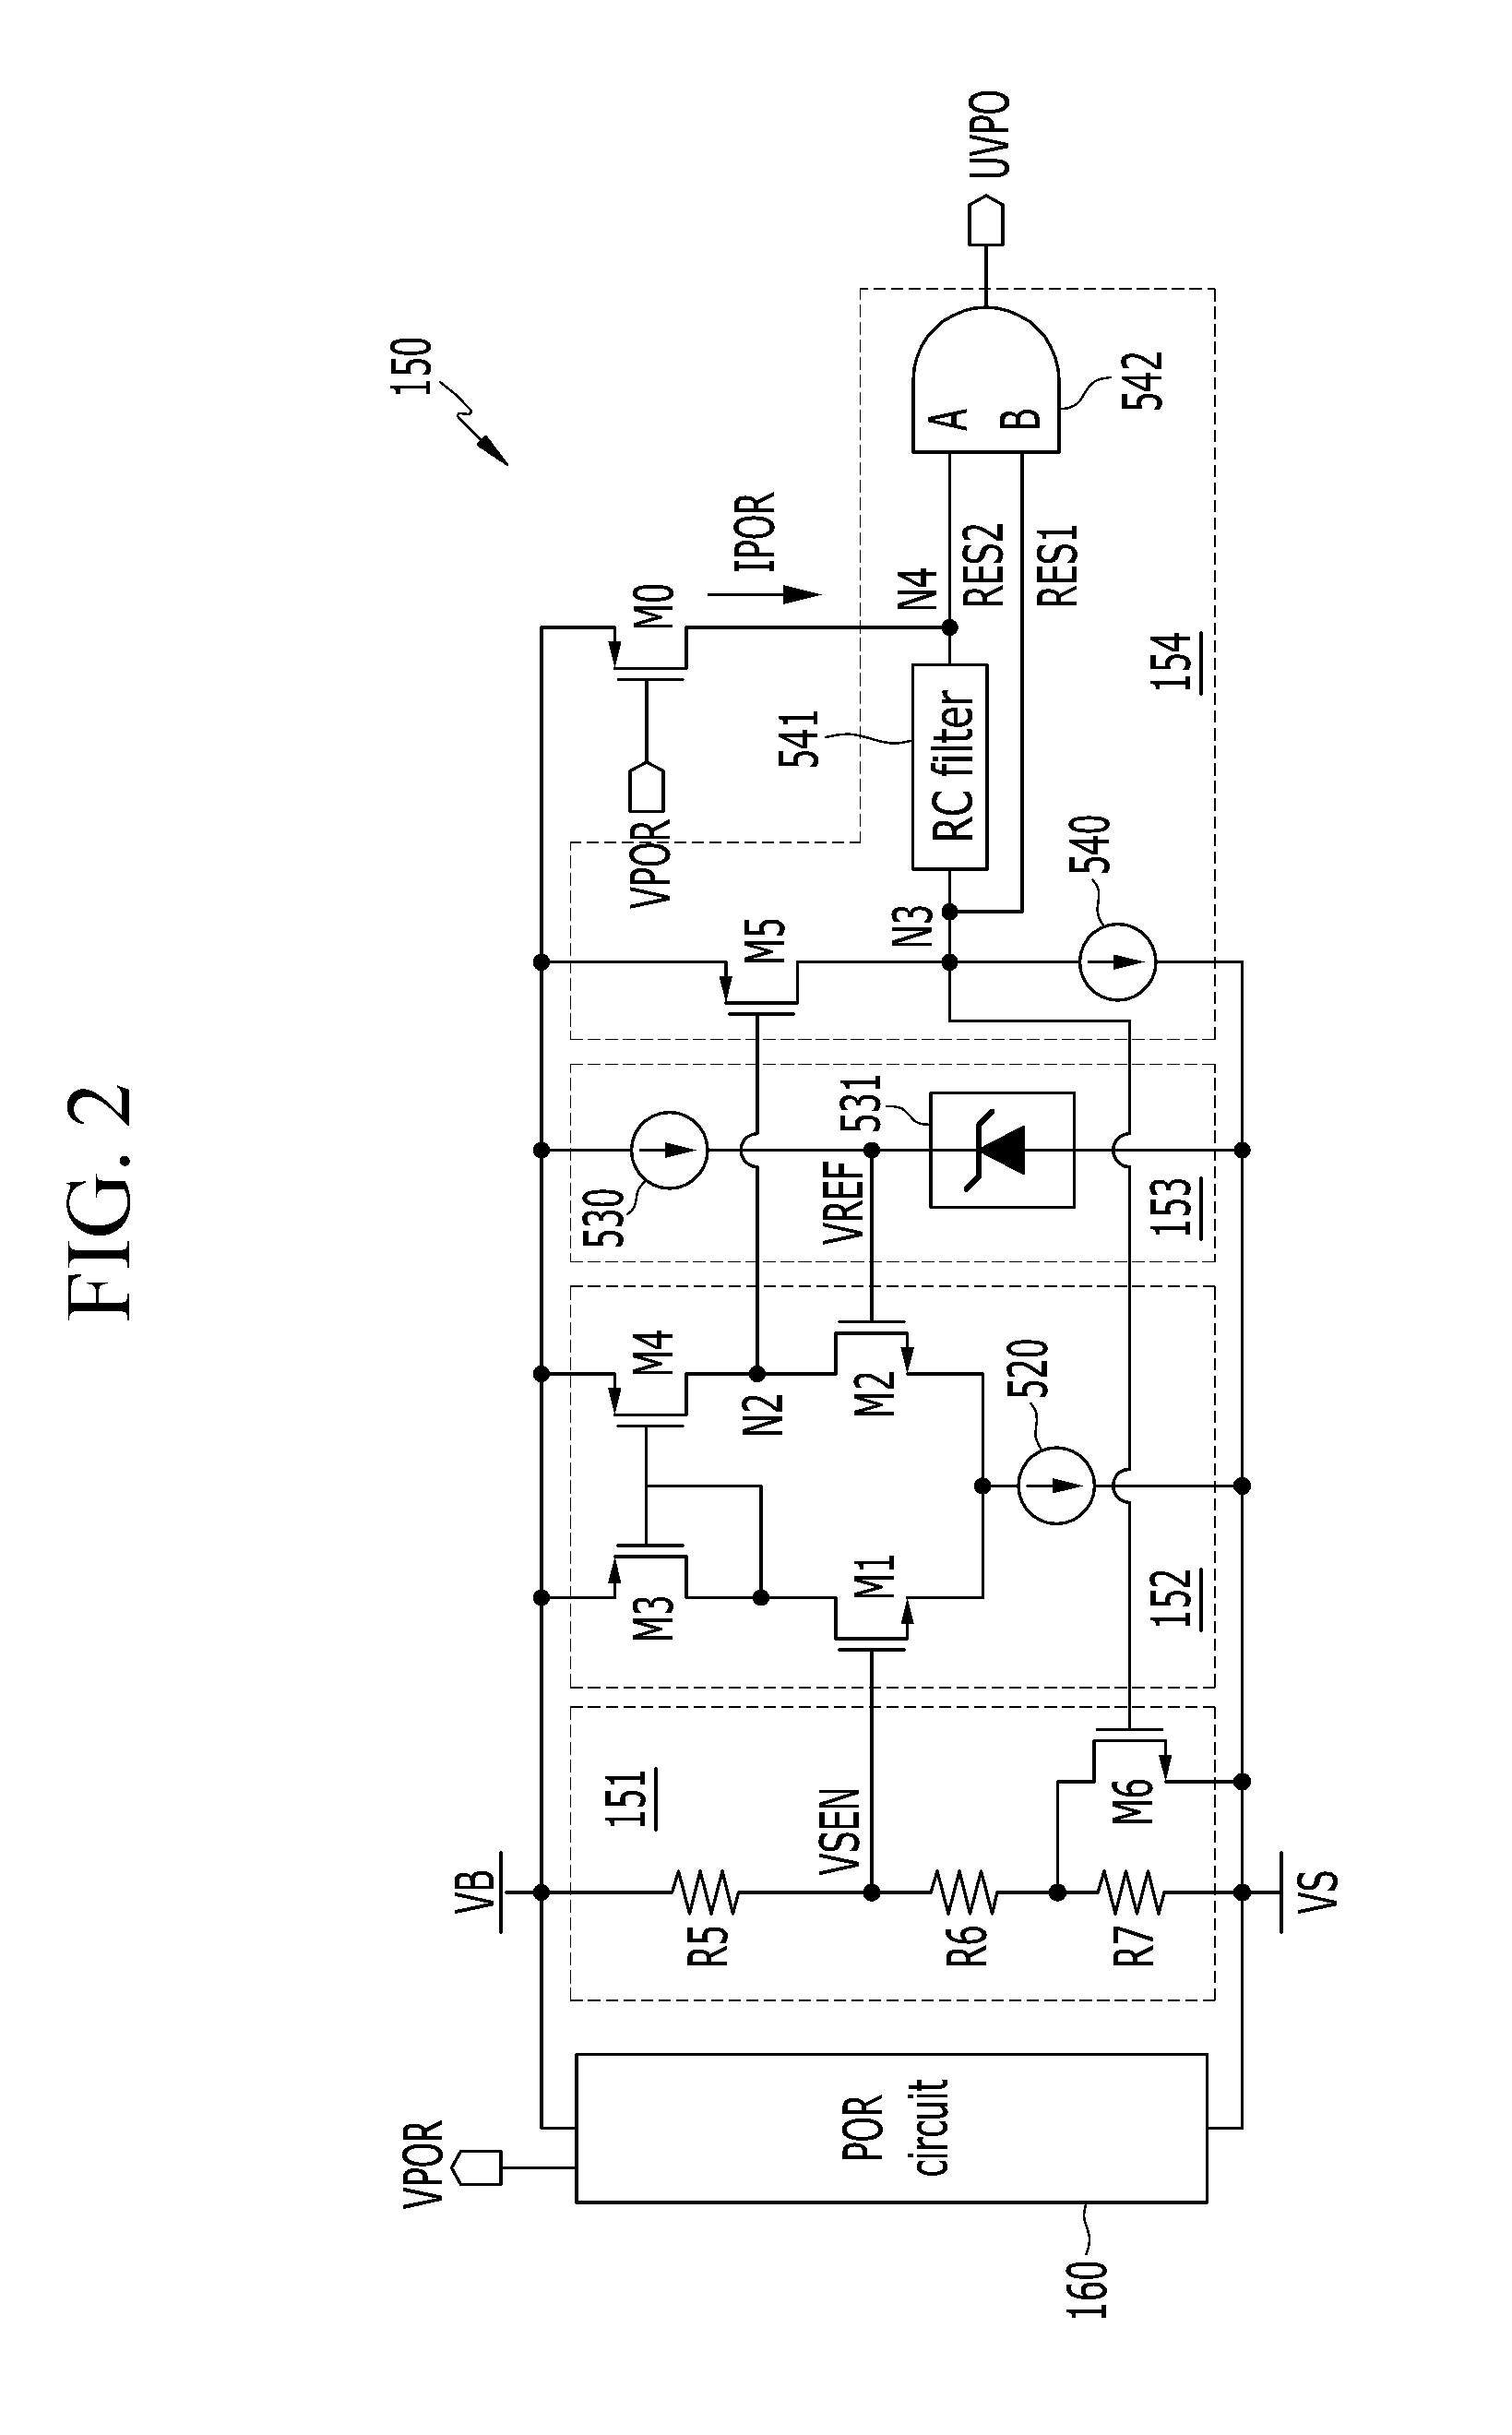 Power-on reset circuit and under-voltage lockout circuit comprising the same